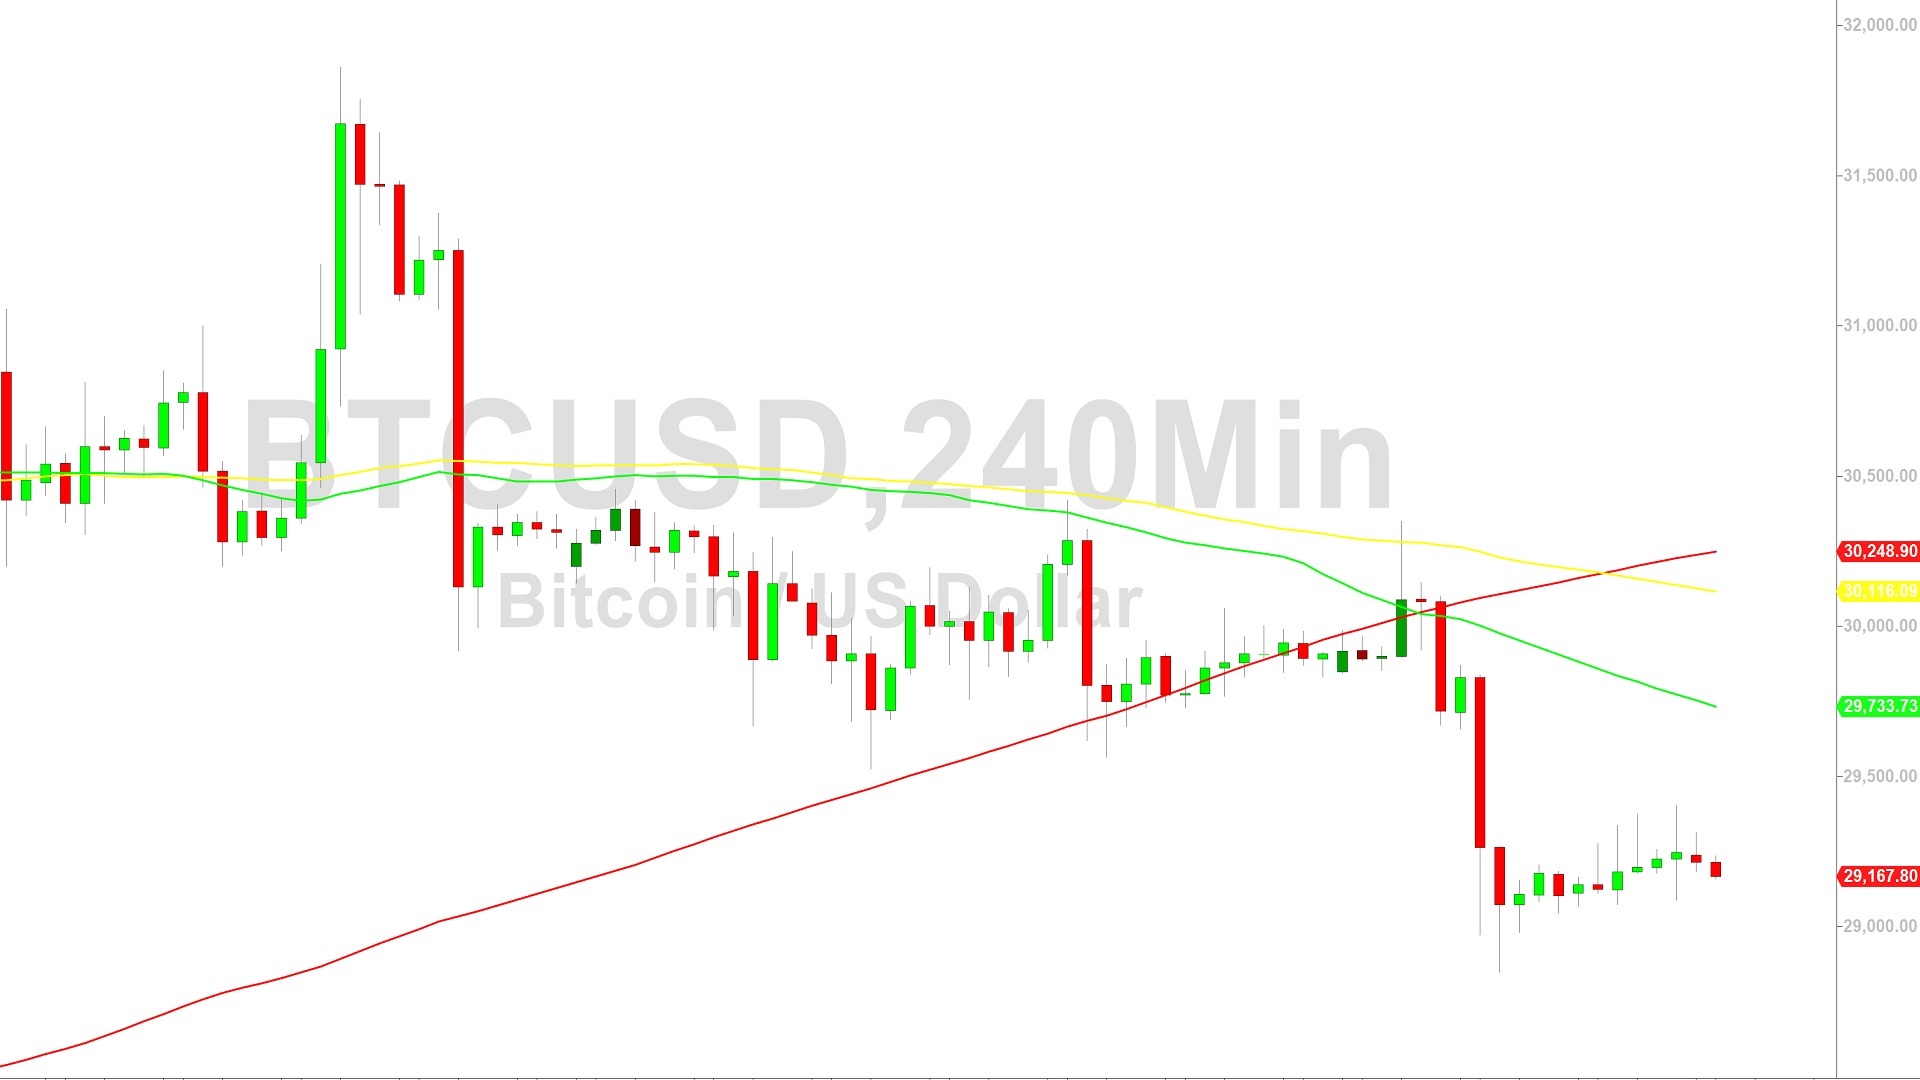 Bitcoin Price Analysis: 29403 Technicals Tested